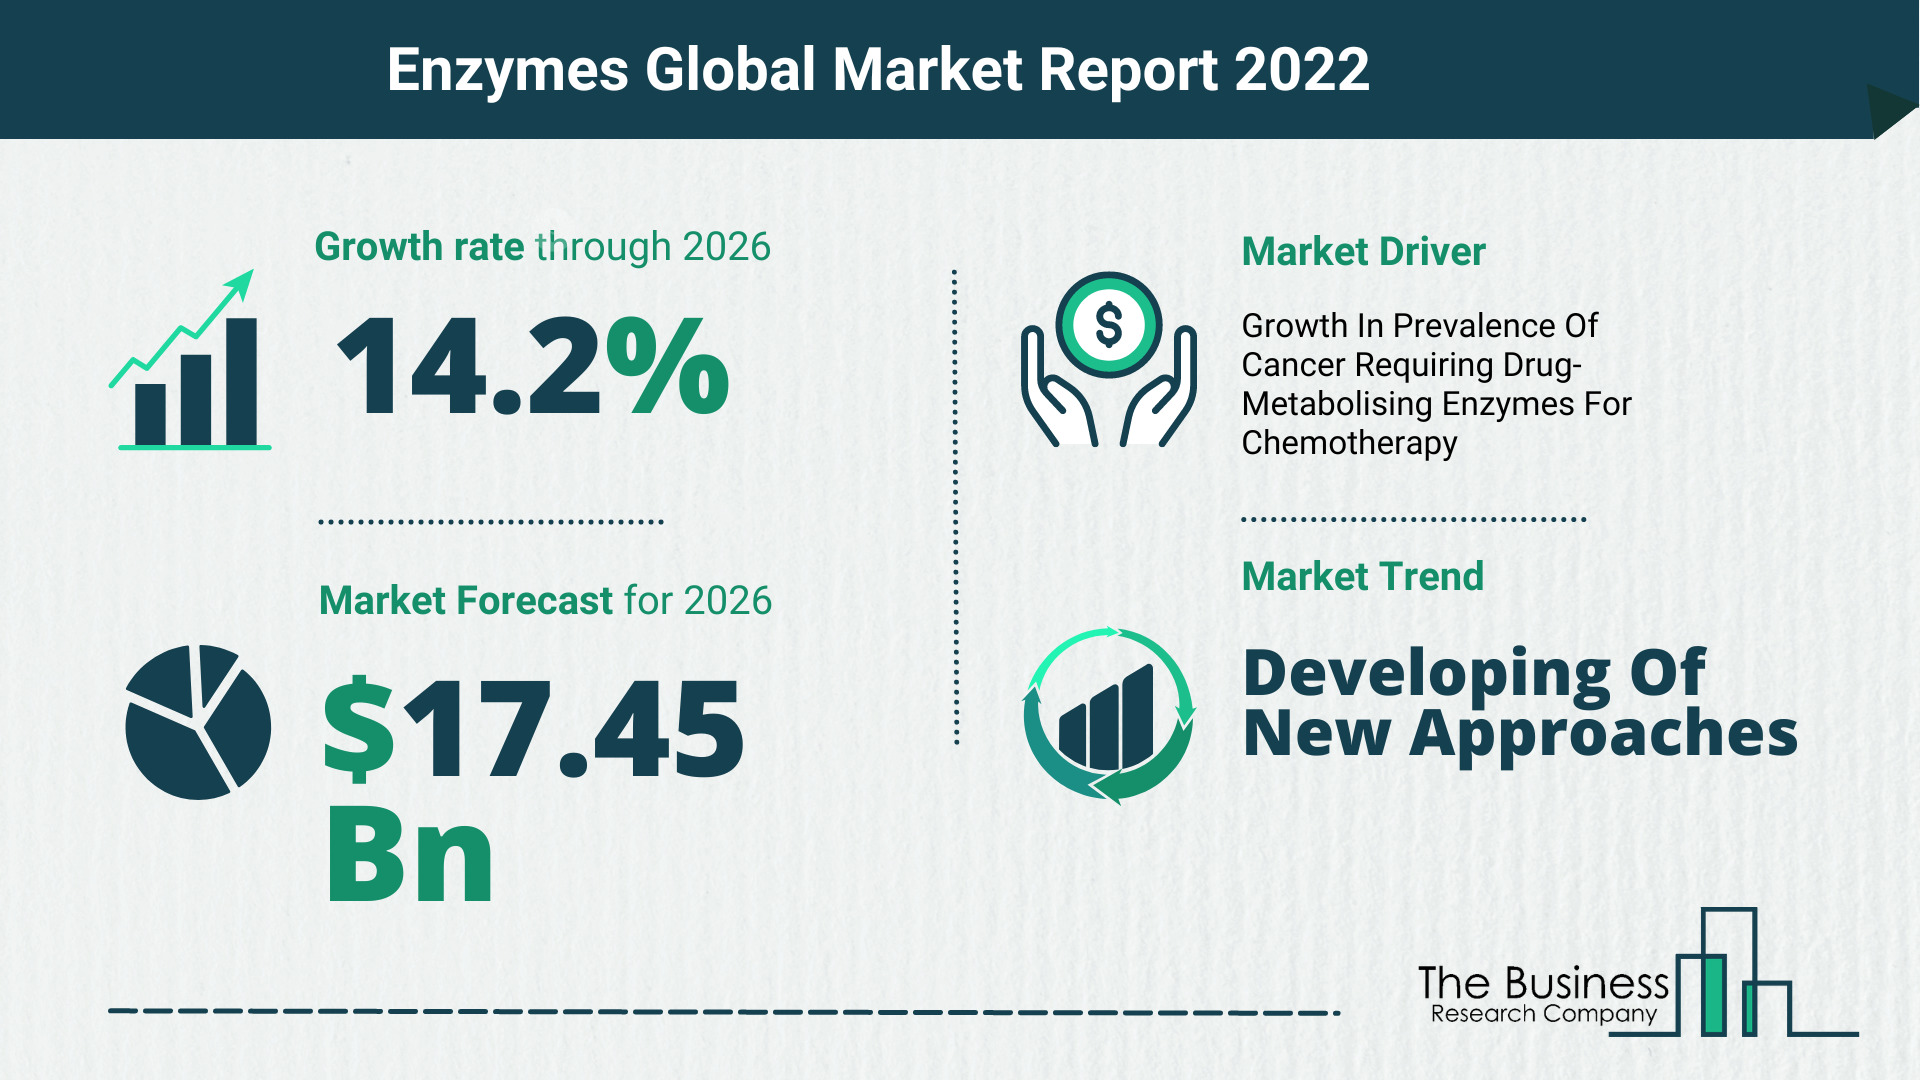 How Will The Enzymes Market Grow In 2022?